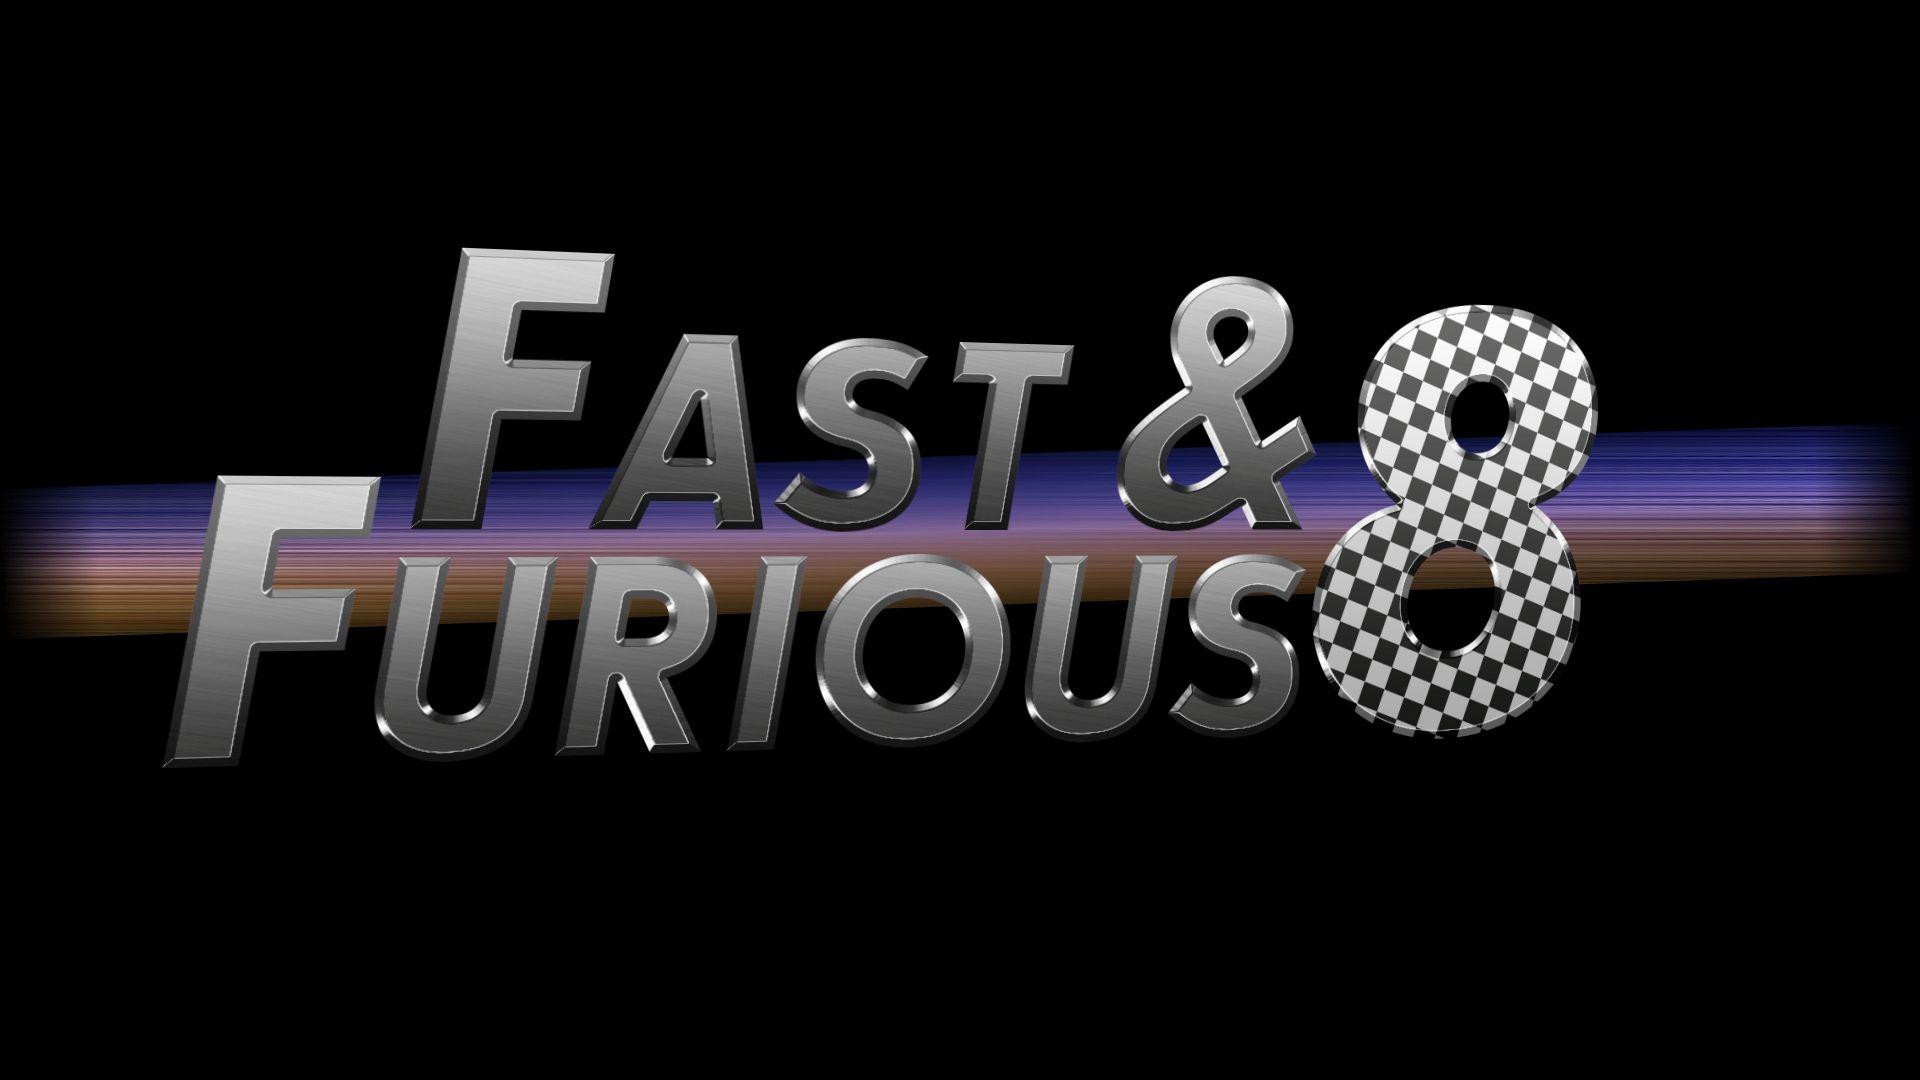 Fast and Furious 8 HD wallpaper free download